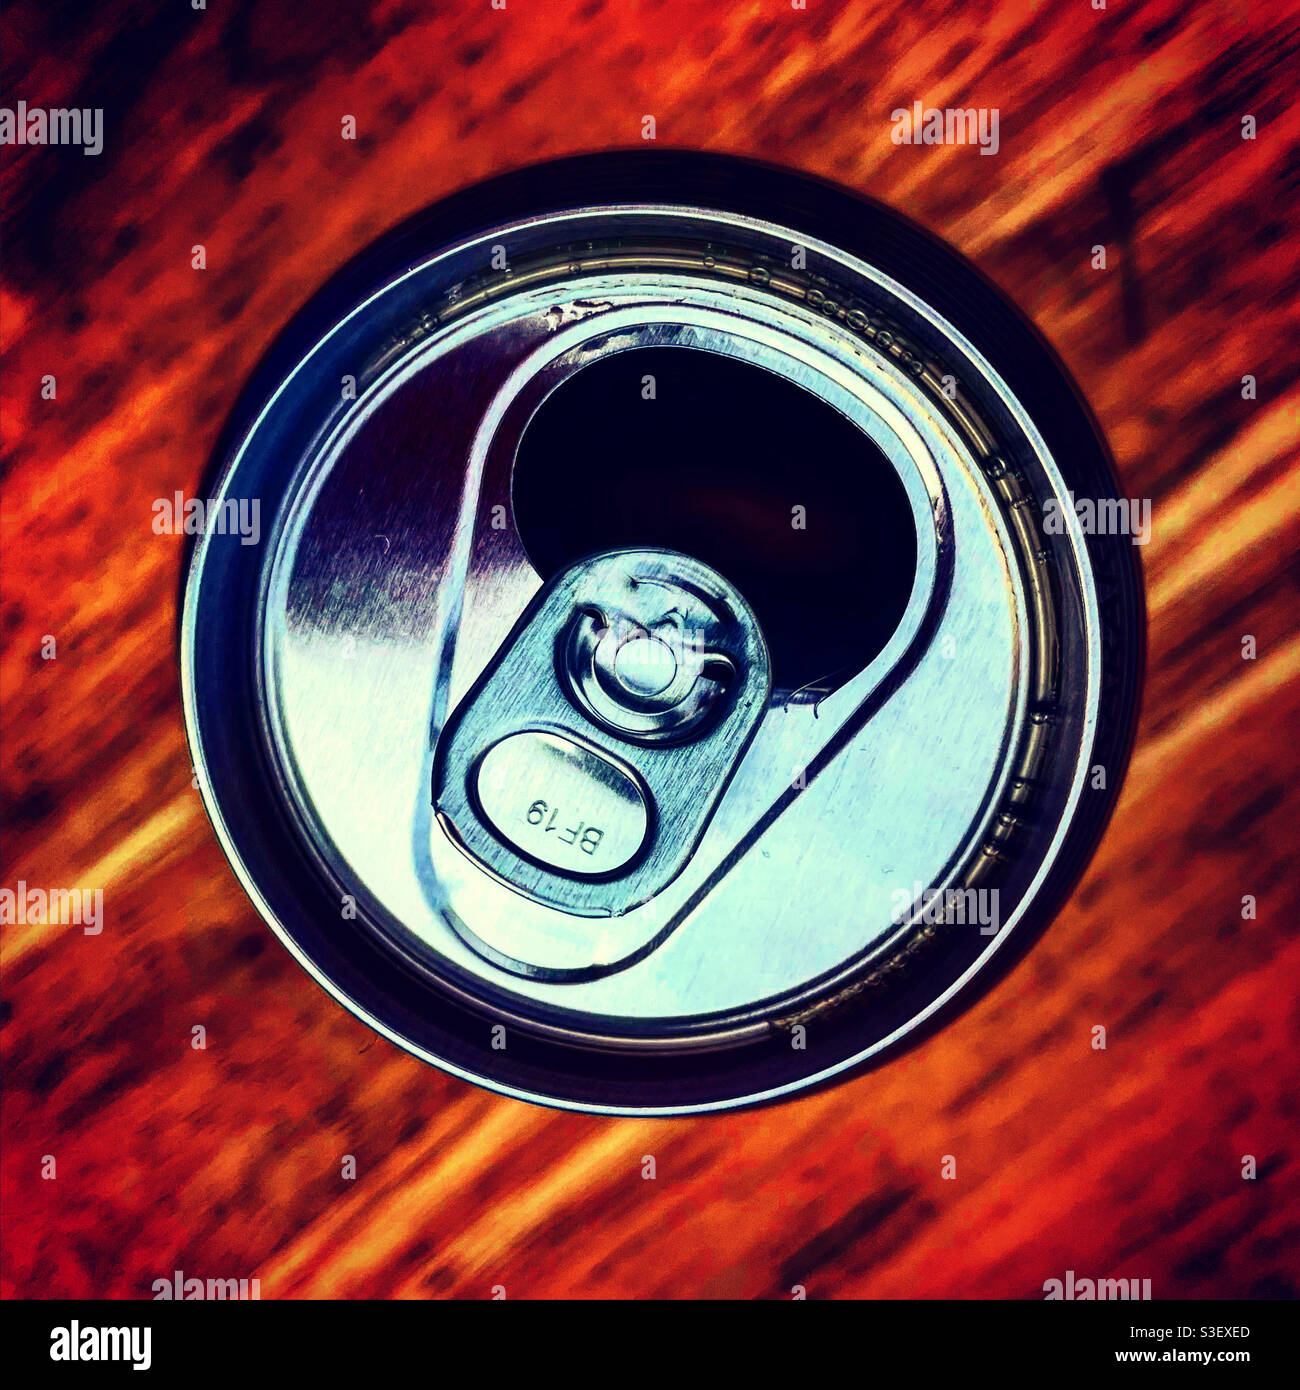 Soda Inox Can top view on a wood table Stock Photo